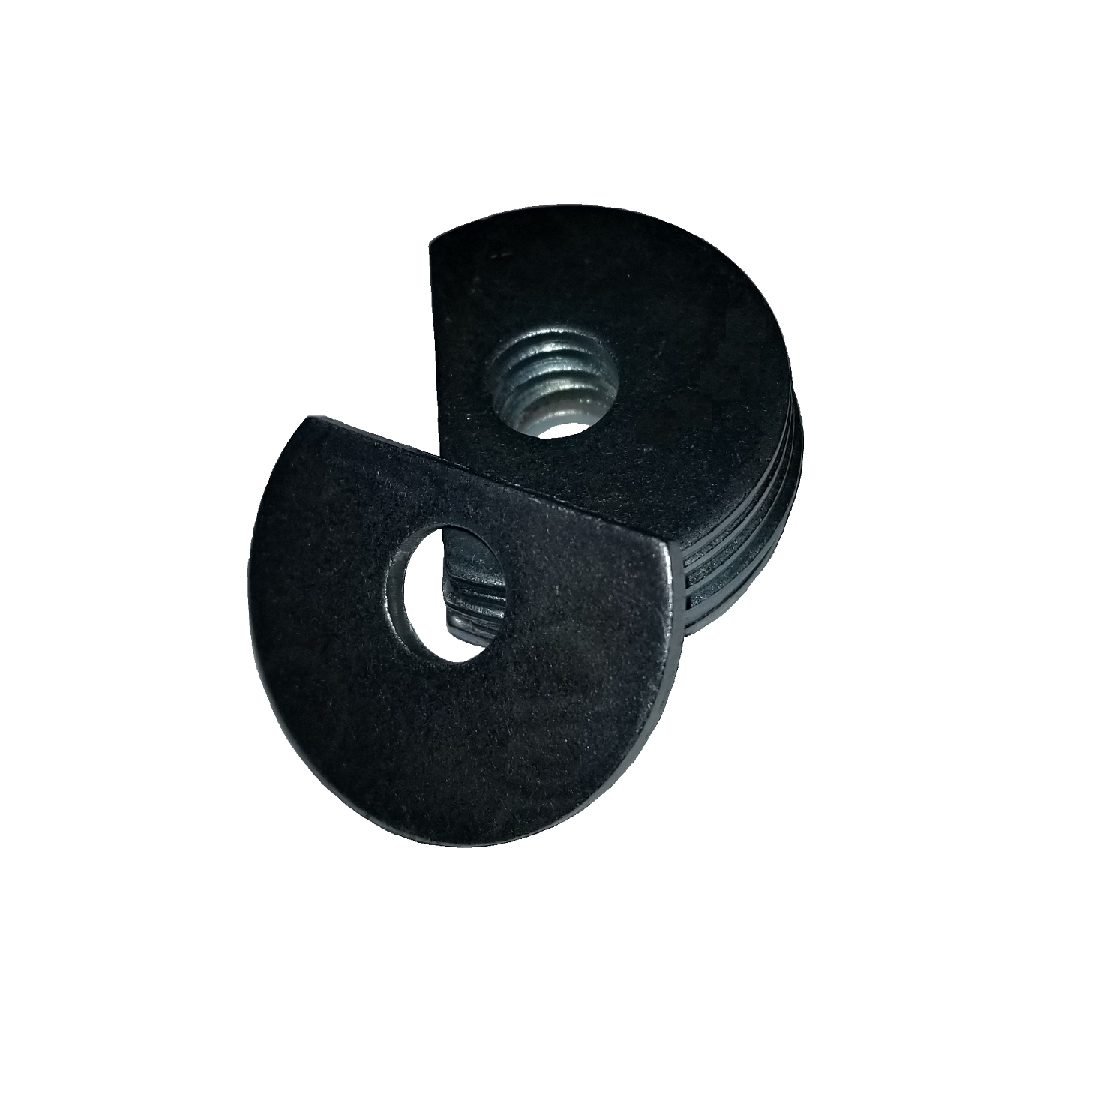 Clipped OD Washer - 0.281 ID, 0.625 OD, 0.062 Thick, Low Carbon Steel - Soft, Zinc & Clear